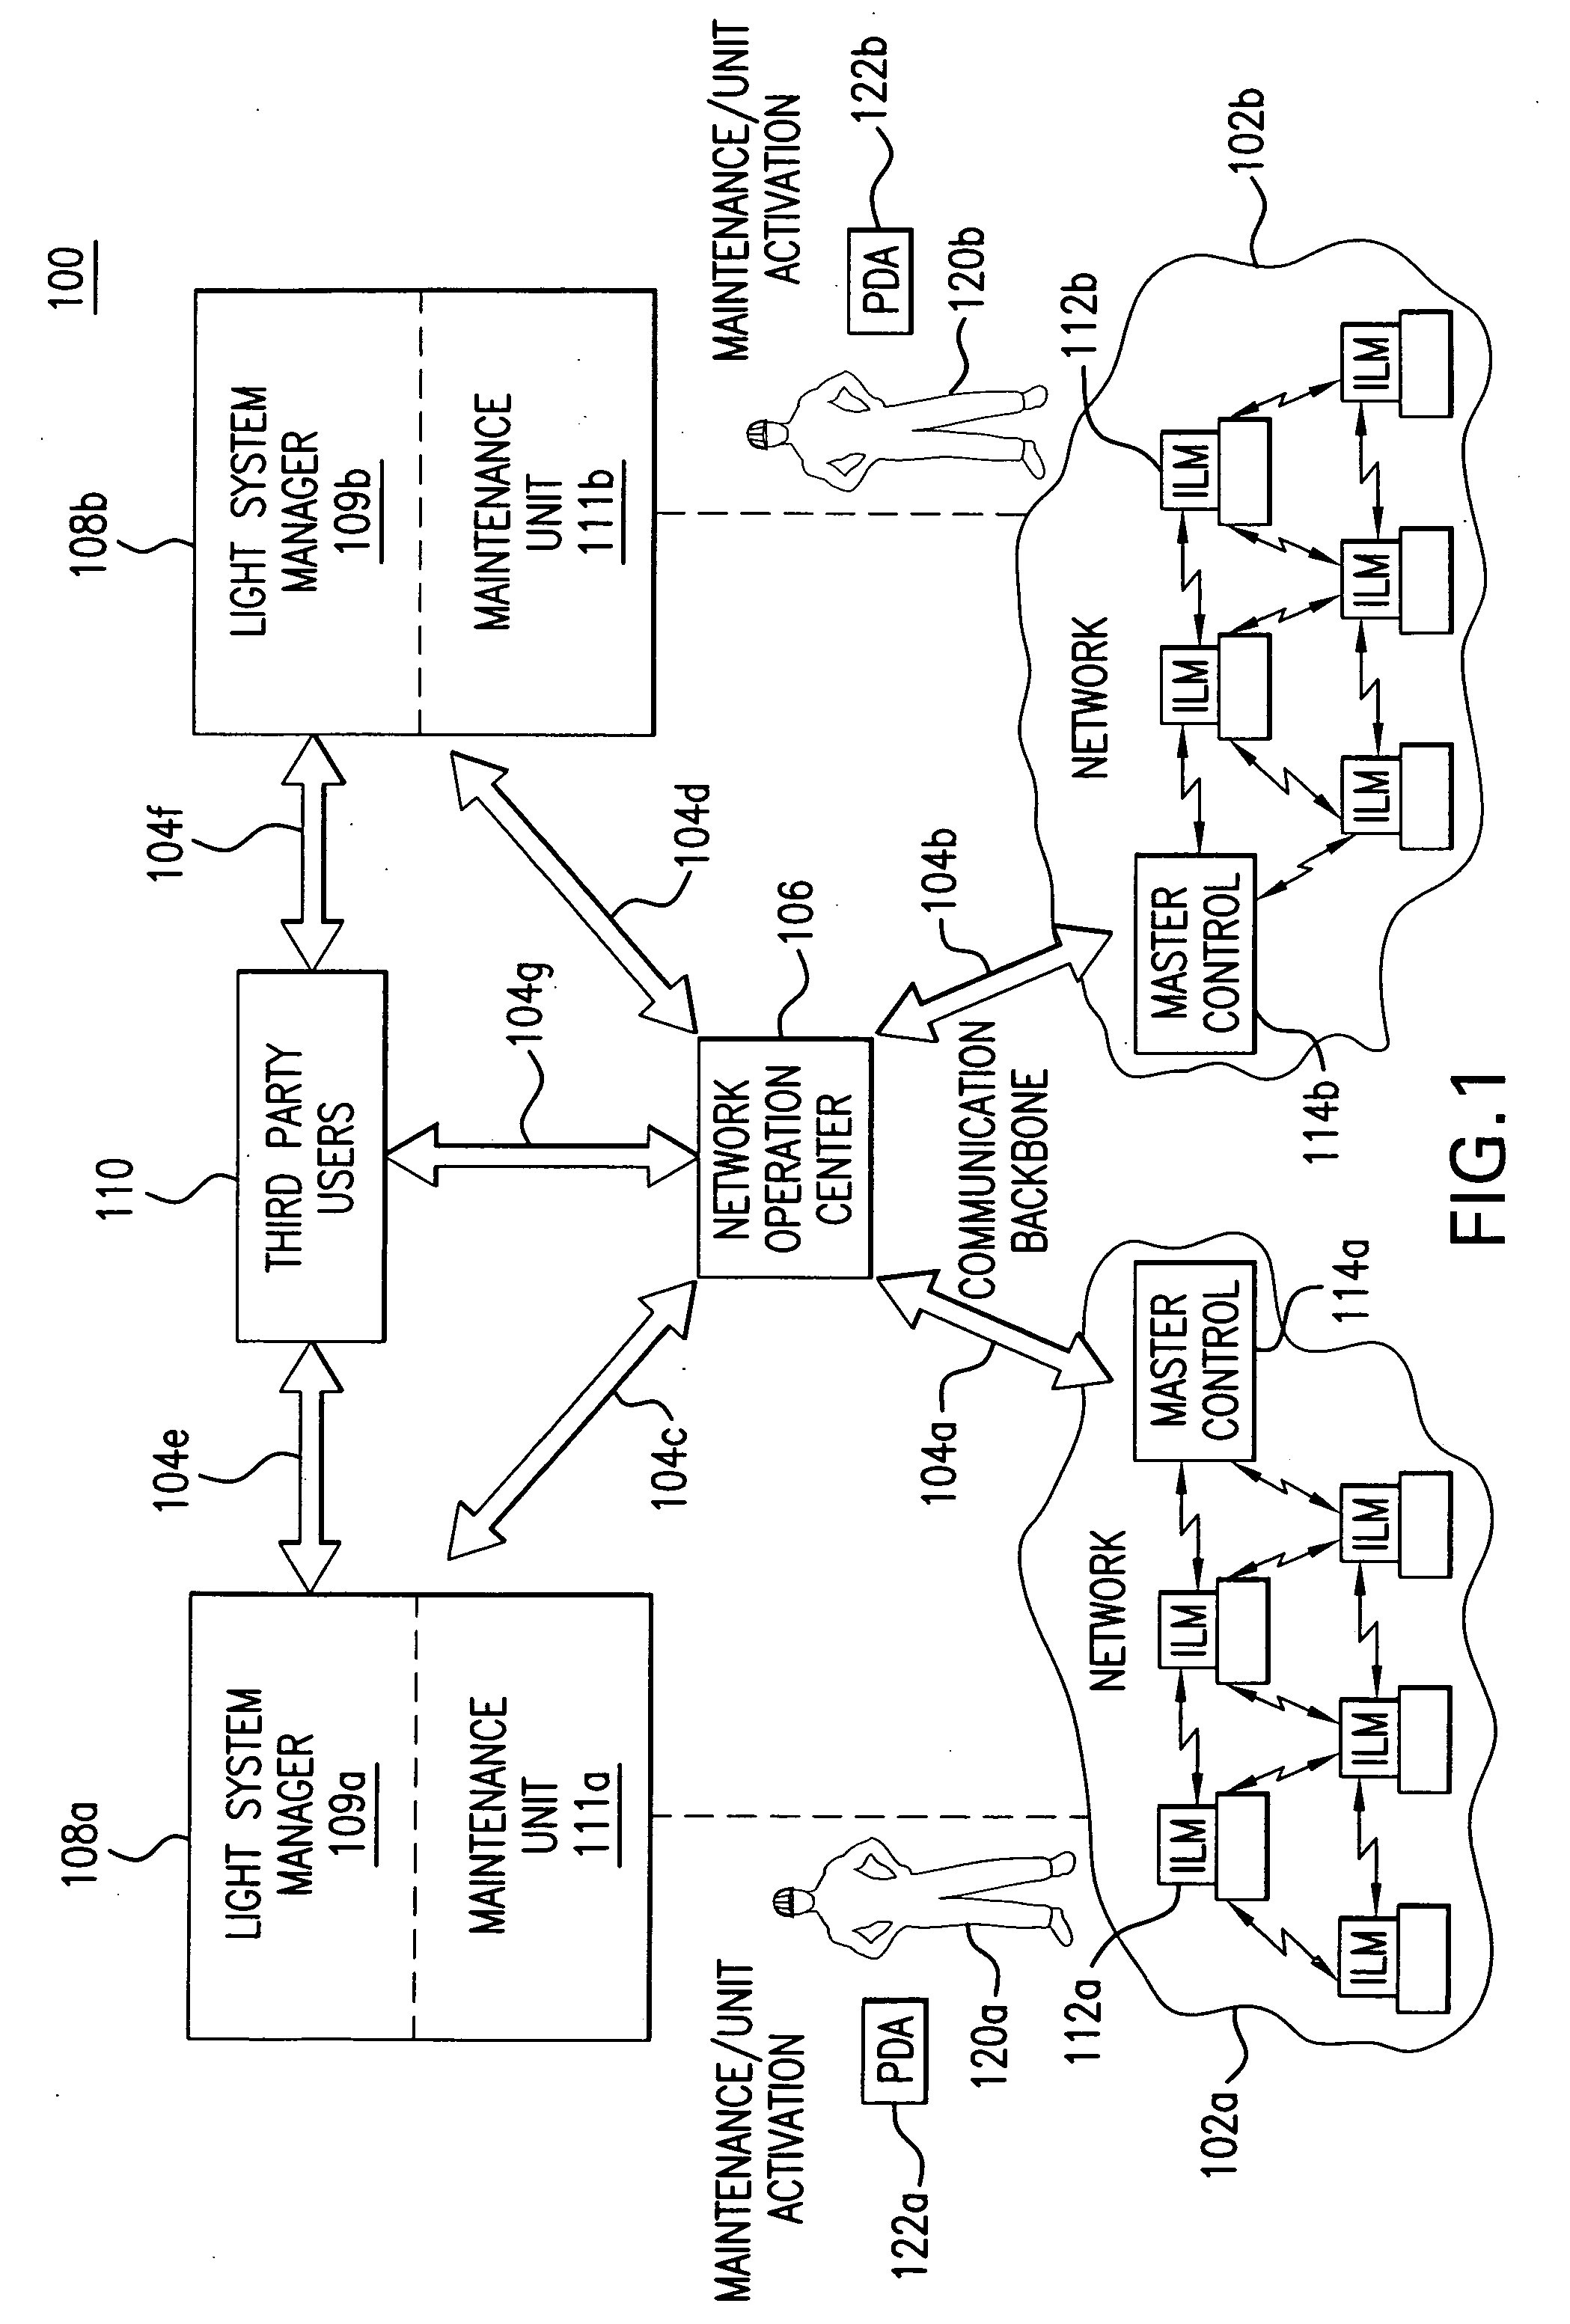 Light management system having networked intelligent luminaire managers that support third-party applications